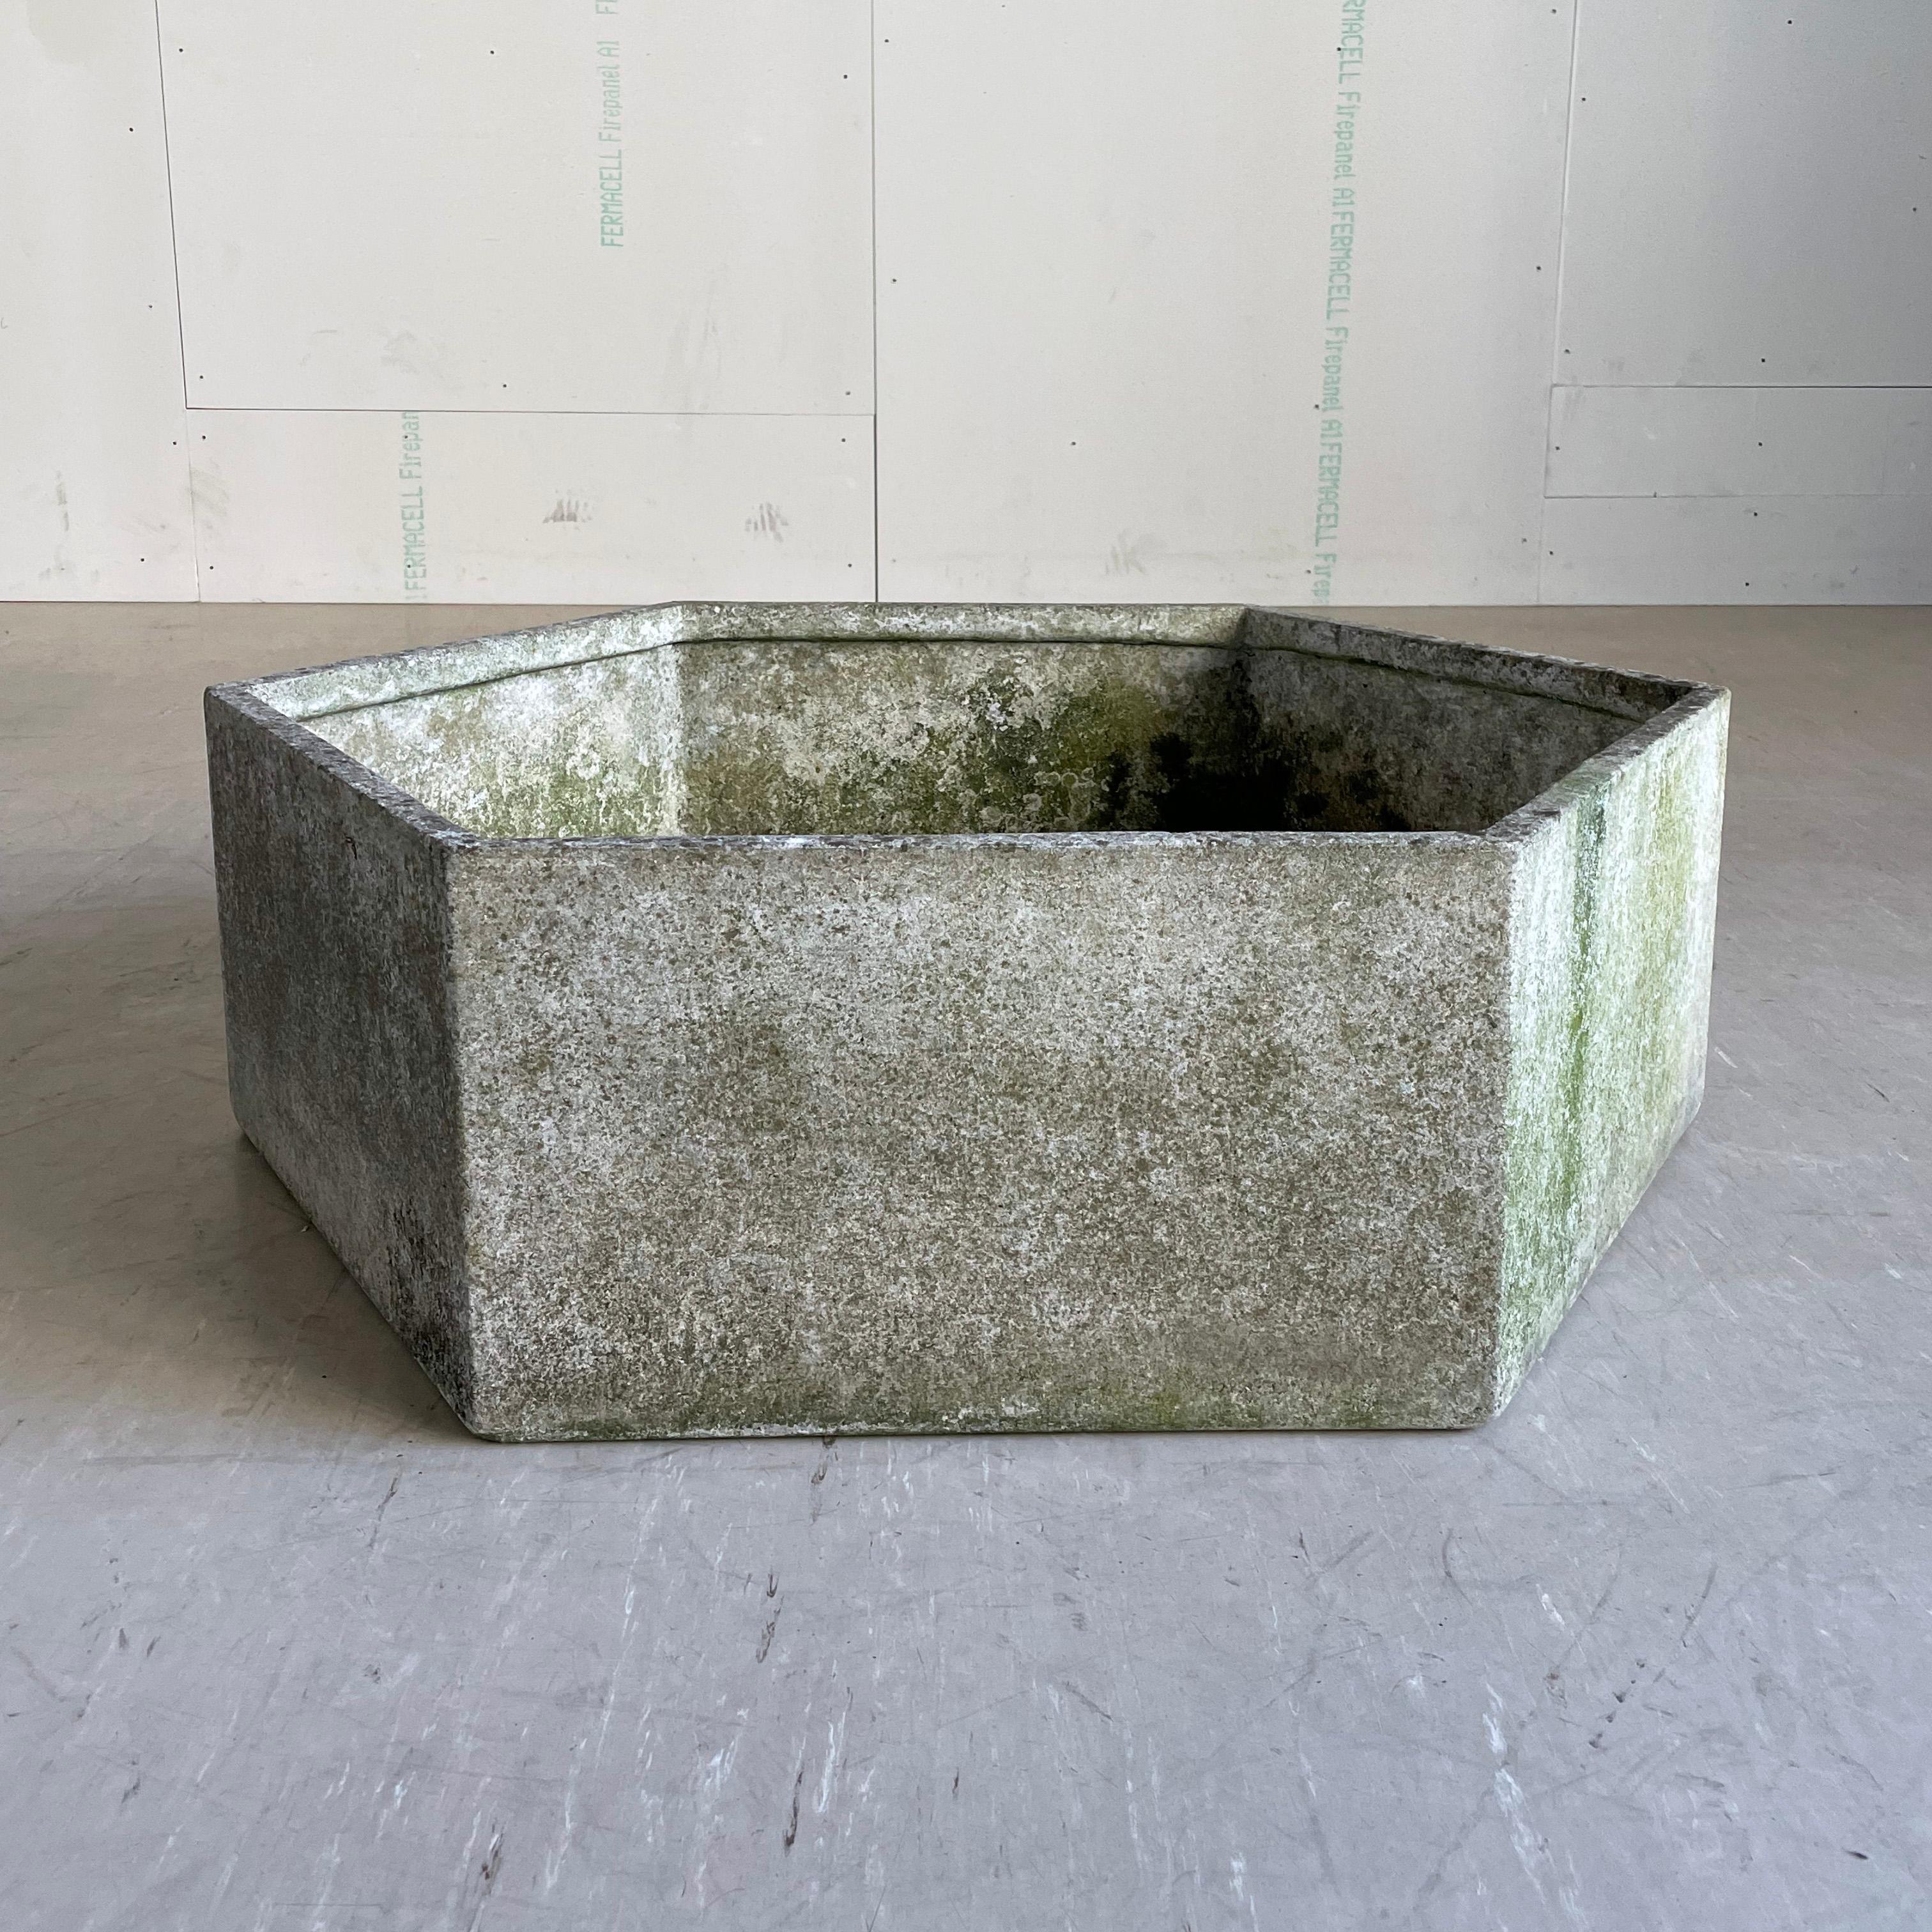 Rare Hexagonal Planter by Swiss Architect, Willy Guhl. Produced by Eternit SA, Switzerland ca. 1960 - 1969. Concrete fibre construction. Beautiful patination with no structural damage. 
Designer: Willy Guhl, CH
Producer: Eternit SA, CH
Measurements: